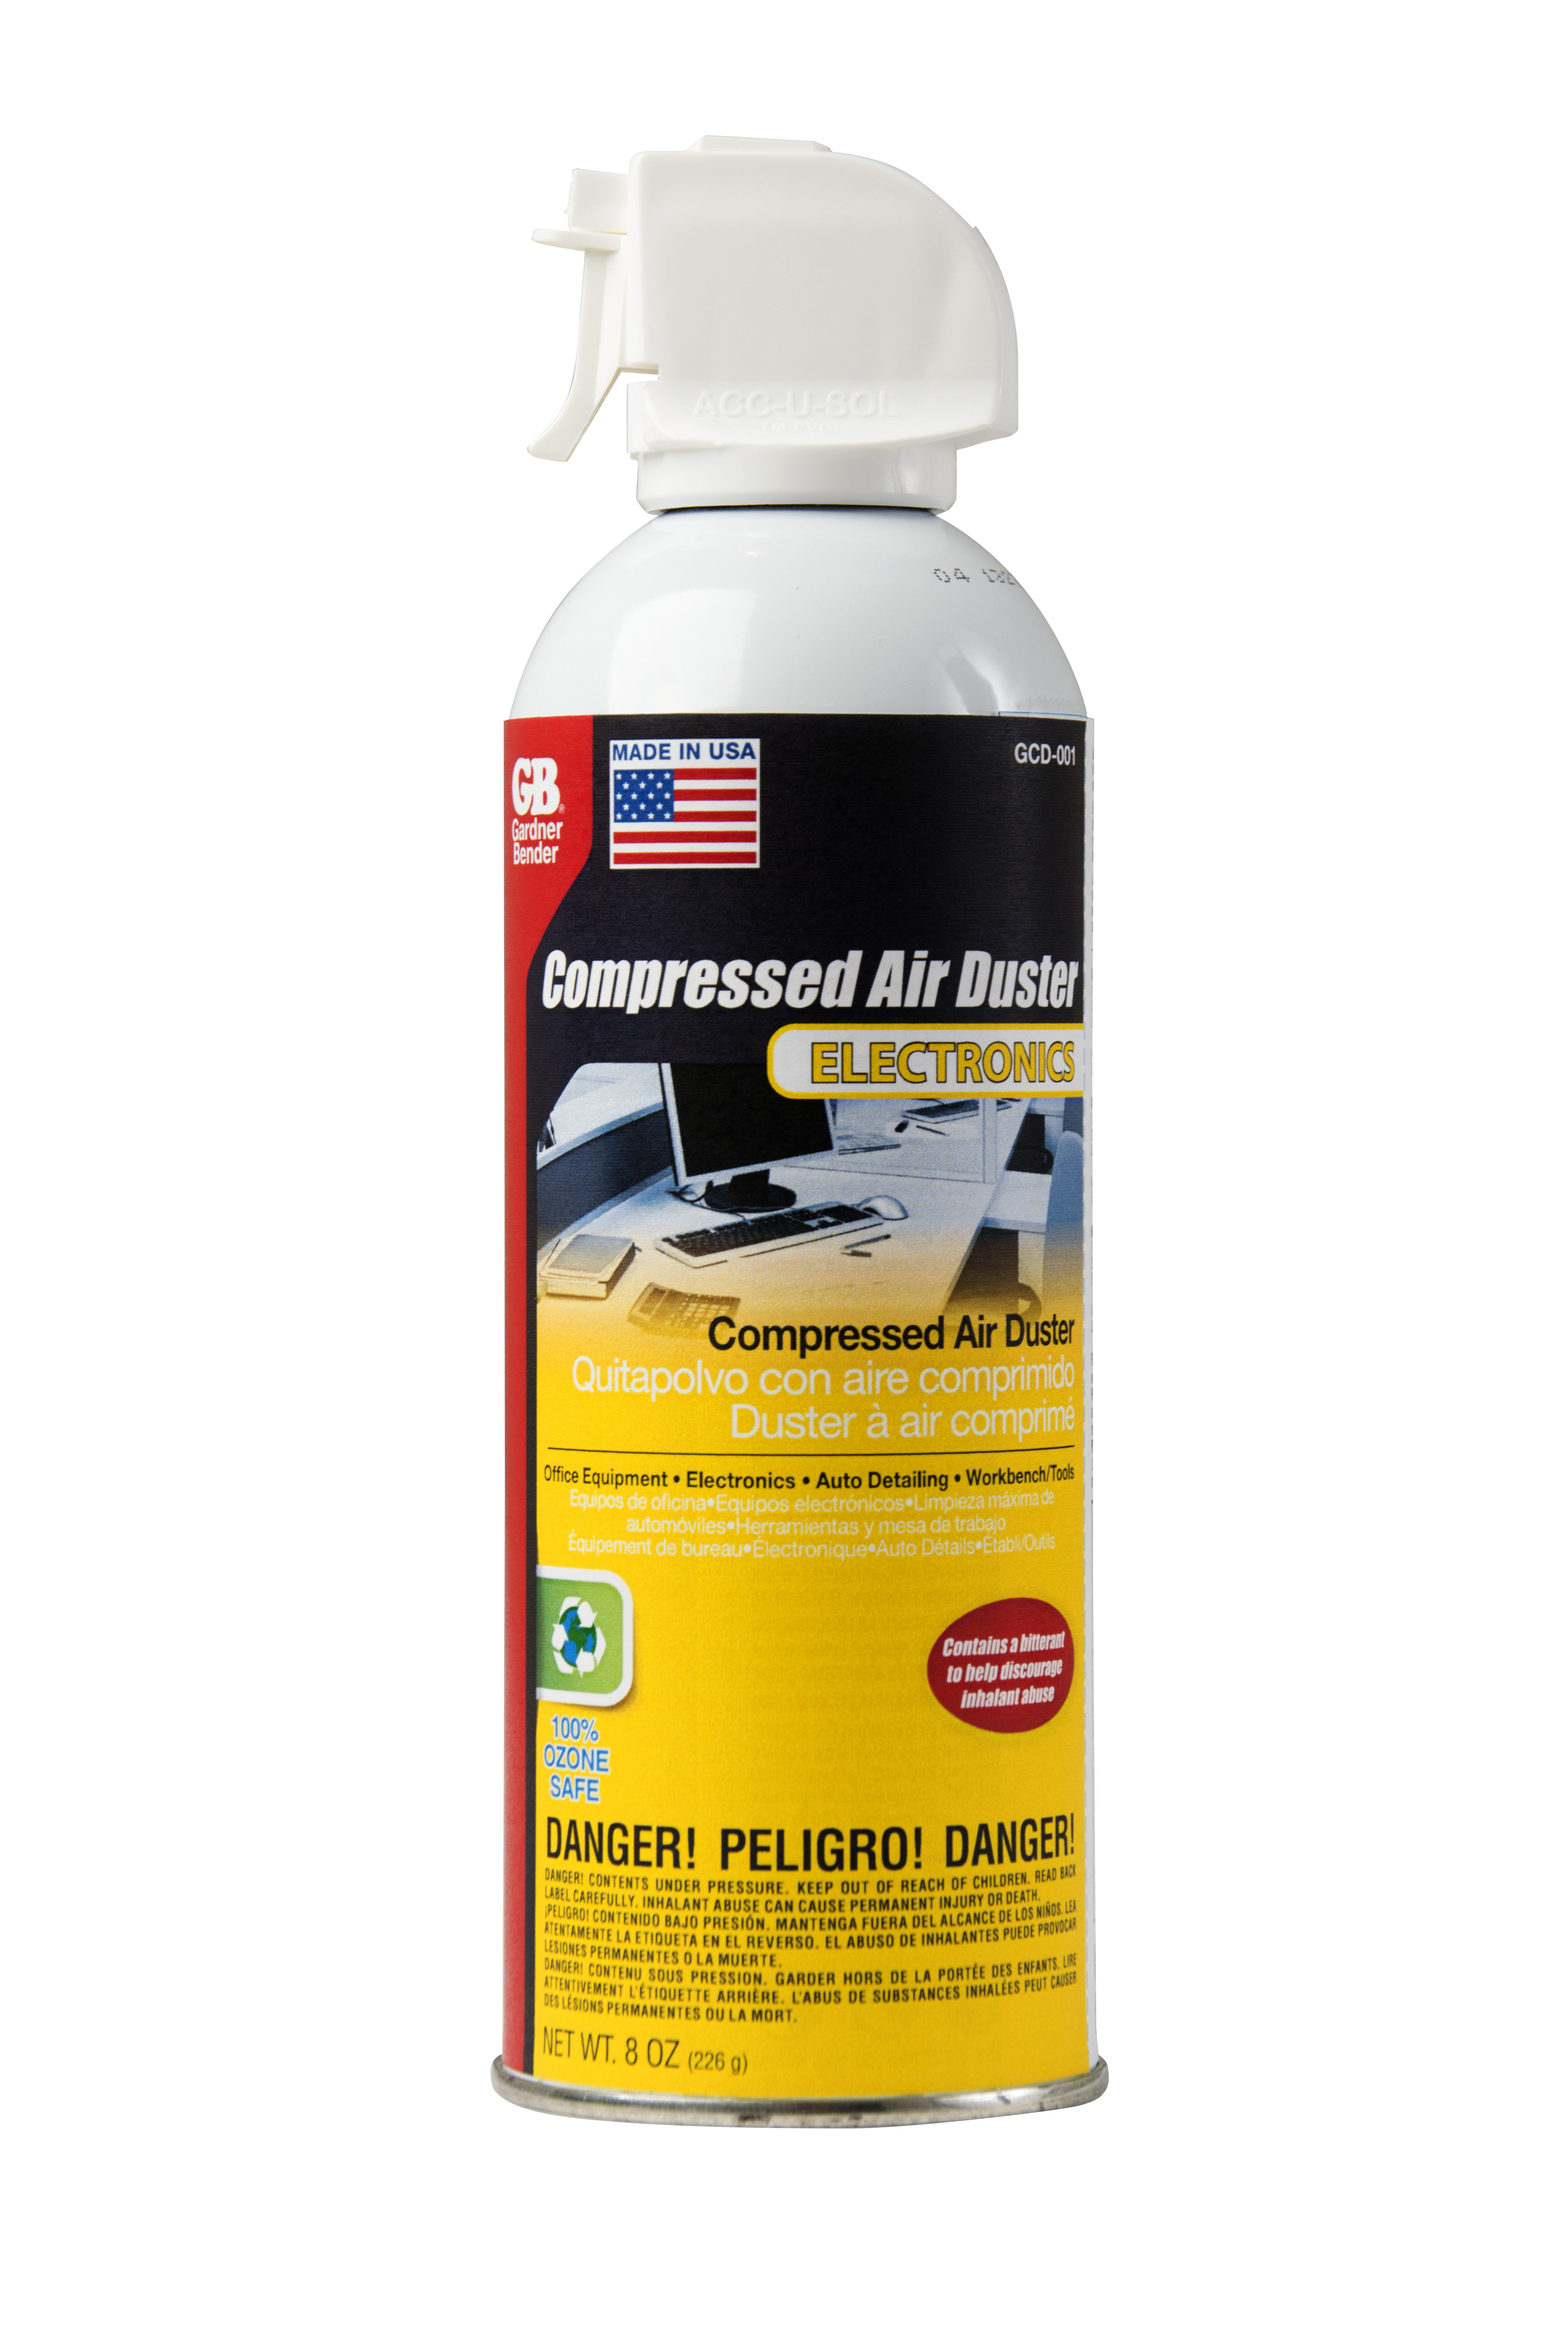 Compressed Air Duster, Cleans without Damaging Sensitive Equipment